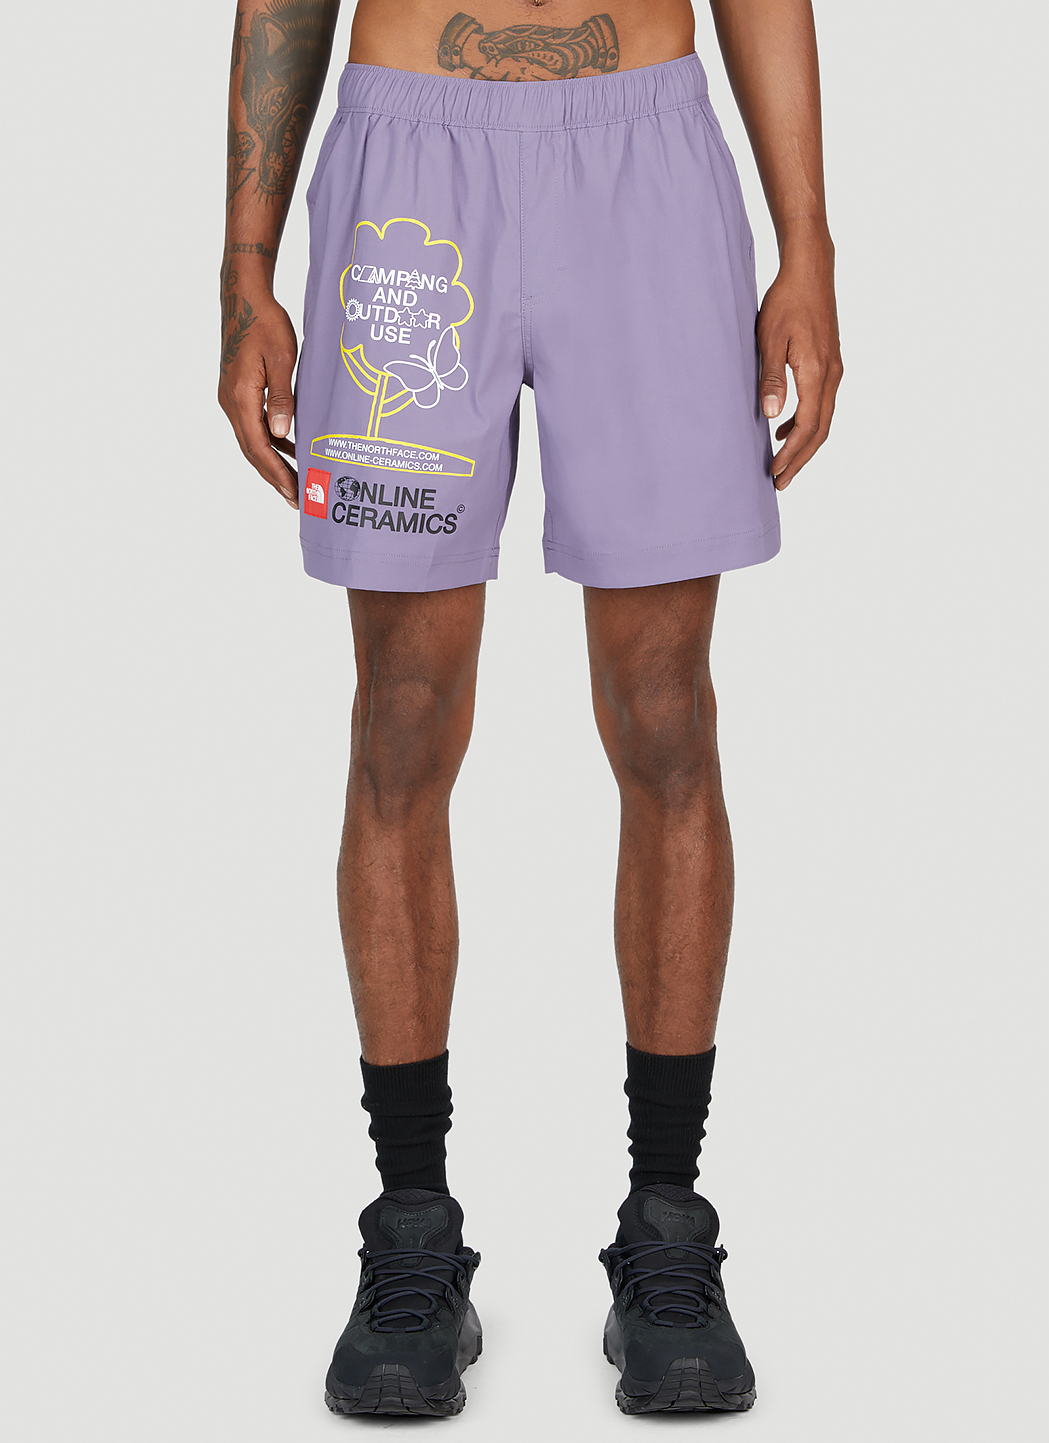 The North Face x Online Ceramics Graphic Shorts in Purple | LN-CC®